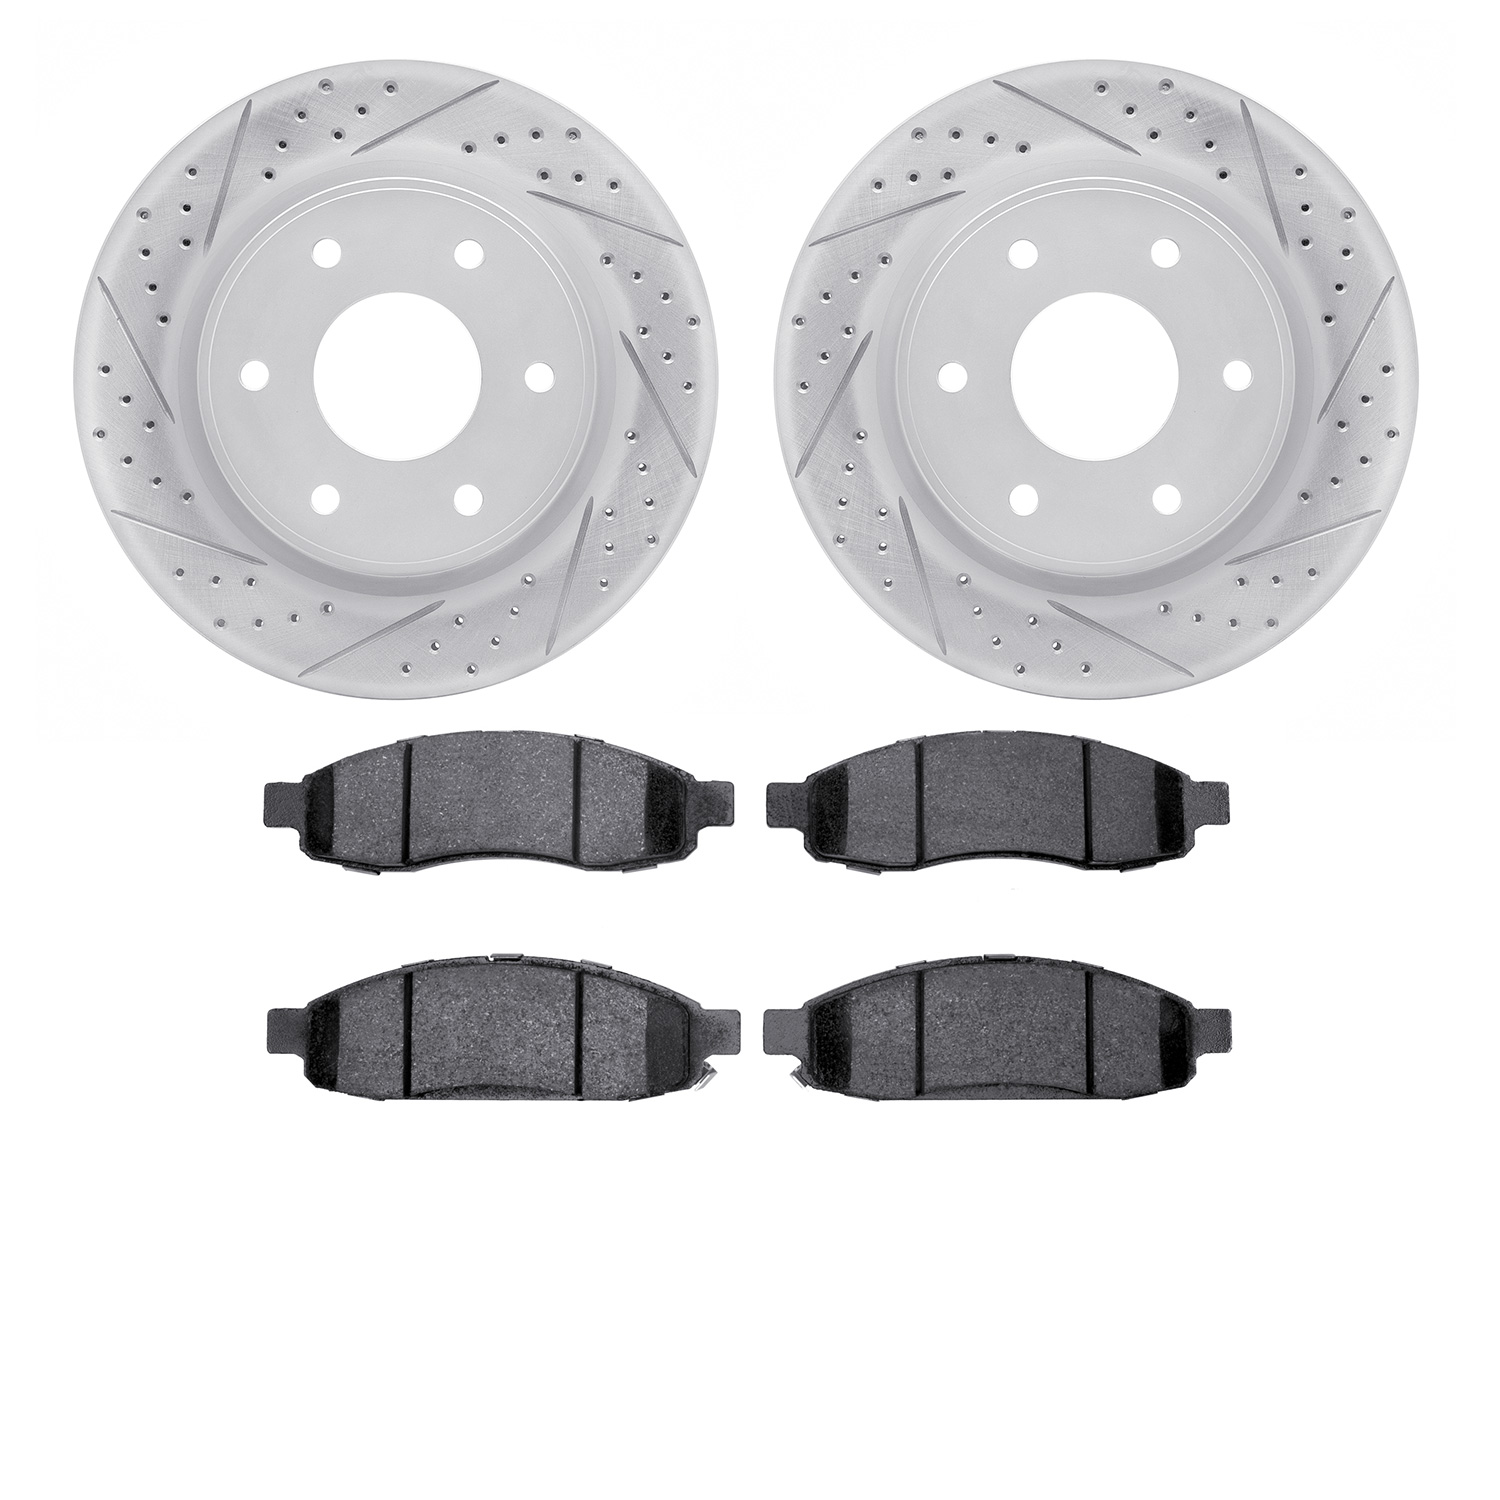 2402-67003 Geoperformance Drilled/Slotted Brake Rotors with Ultimate-Duty Brake Pads Kit, 2005-2007 Infiniti/Nissan, Position: F